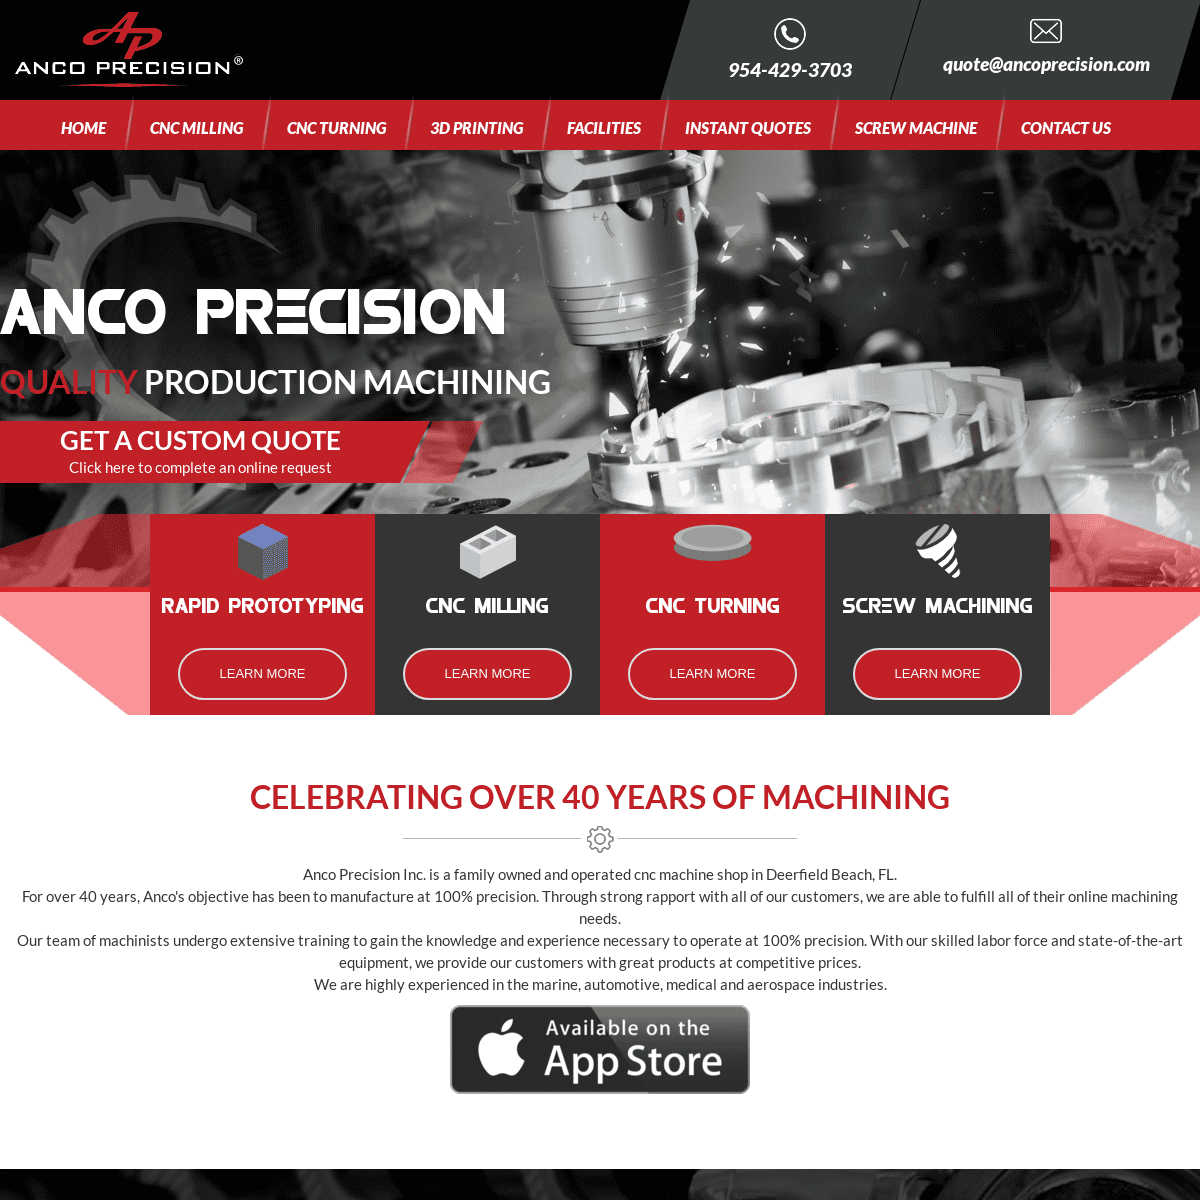 A complete backup of https://ancoprecision.com